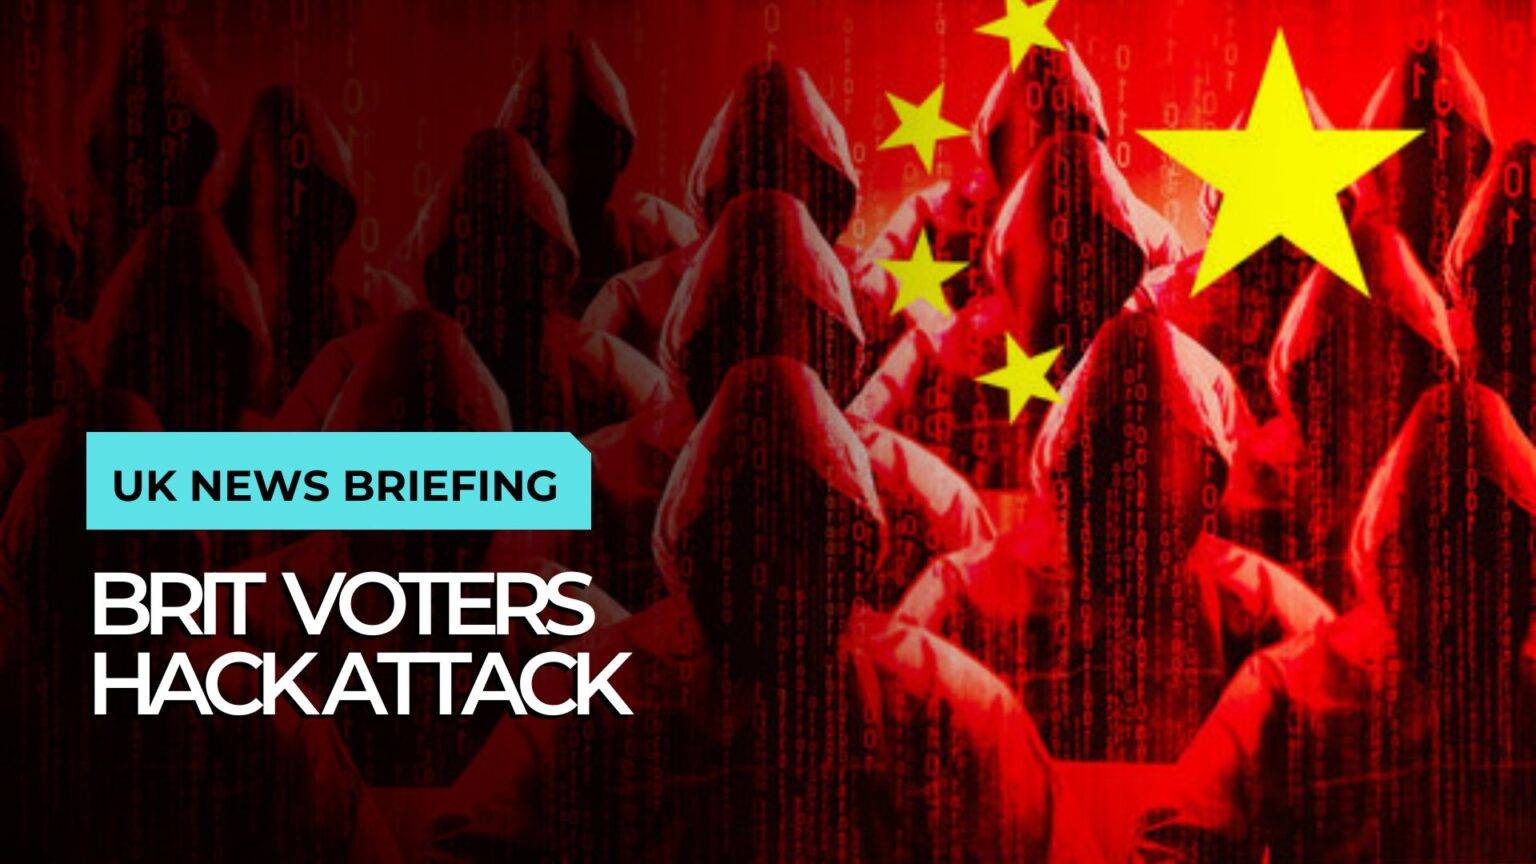 Chinese hackers breach personal details of 40 MILLION British voters, striking at the core of our democracy